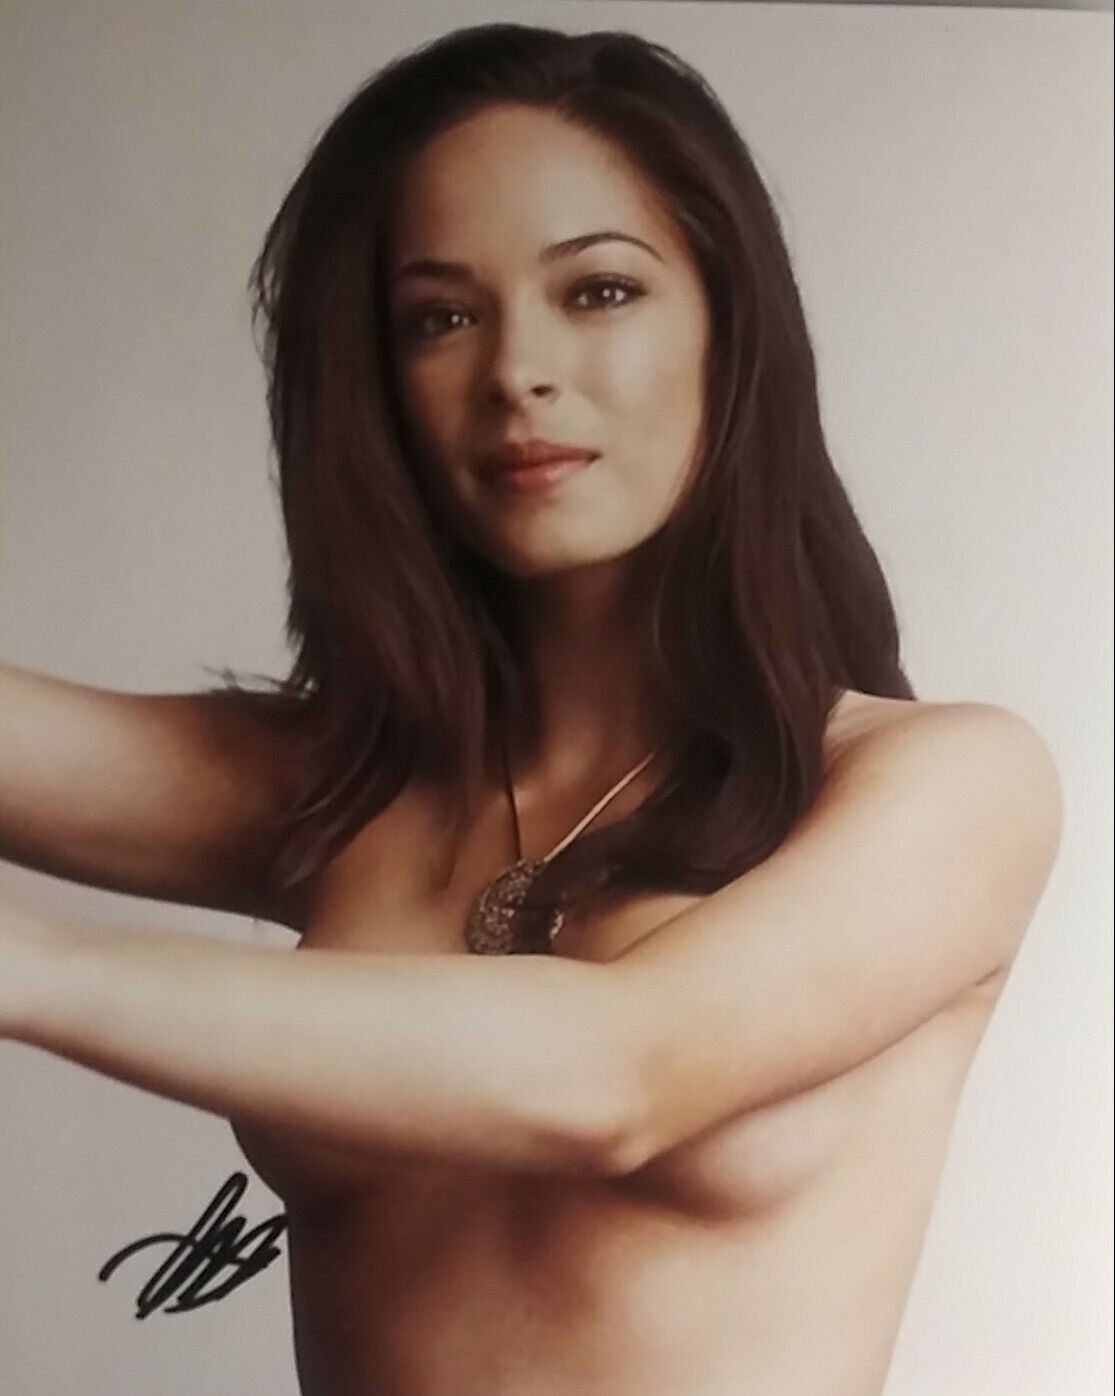 brad surges recommends has kristin kreuk ever been nude pic